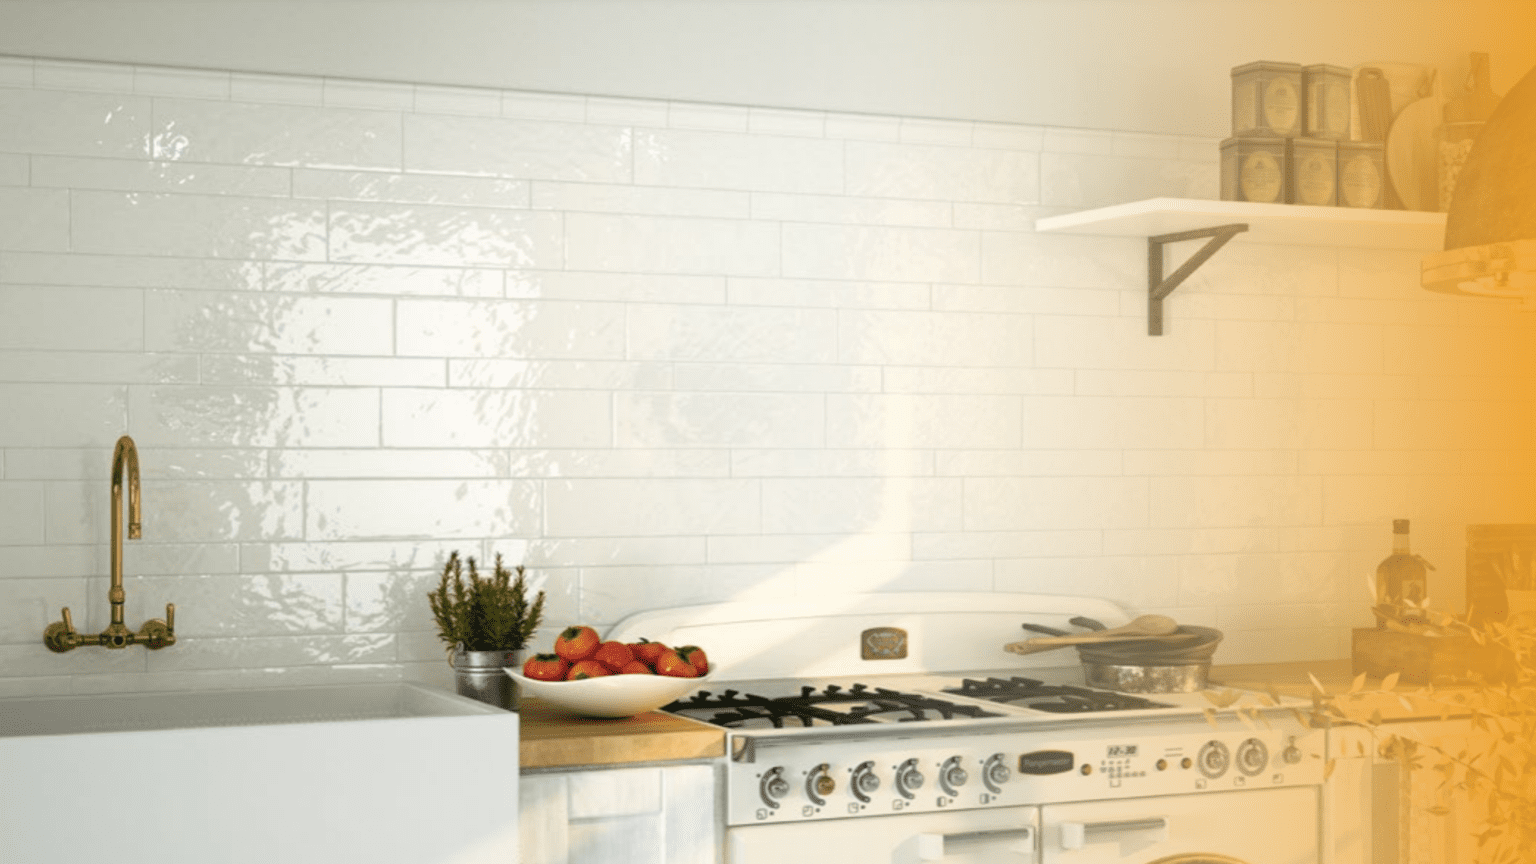 3 Tile Collections To Make Your Kitchen Stand Out This Spring | Kubo Kitchens